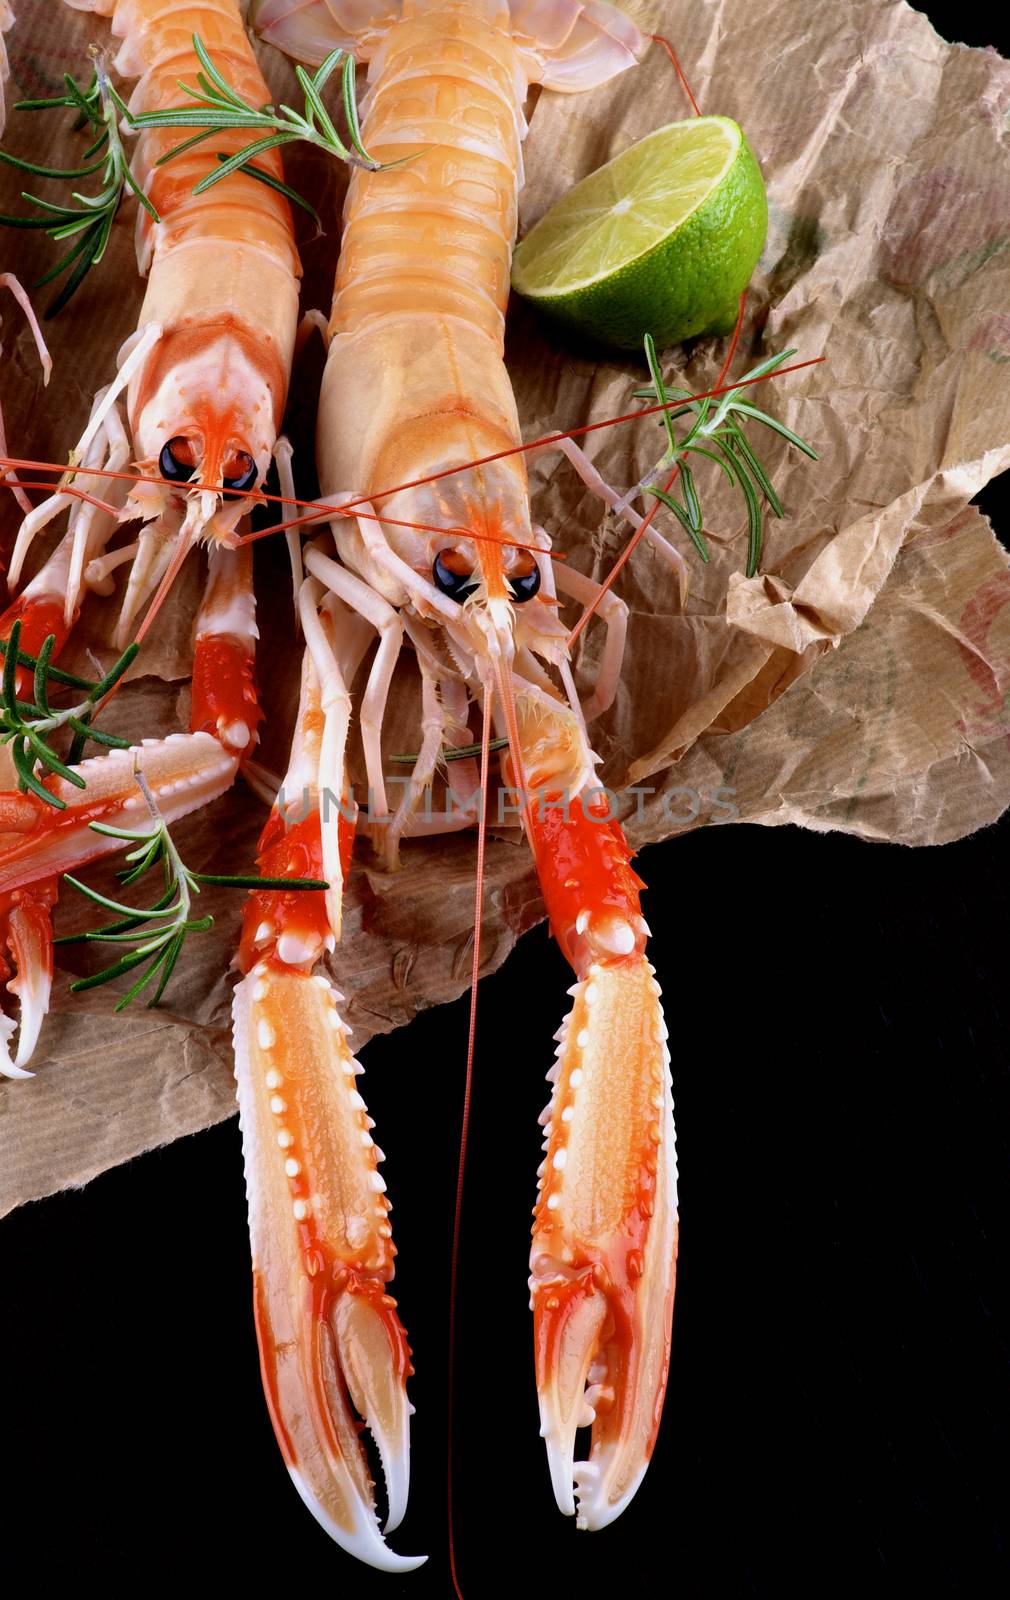 Delicious Raw Langoustines with Half of Lime and Rosemary on Parchment Paper closeup on Dark Wooden background